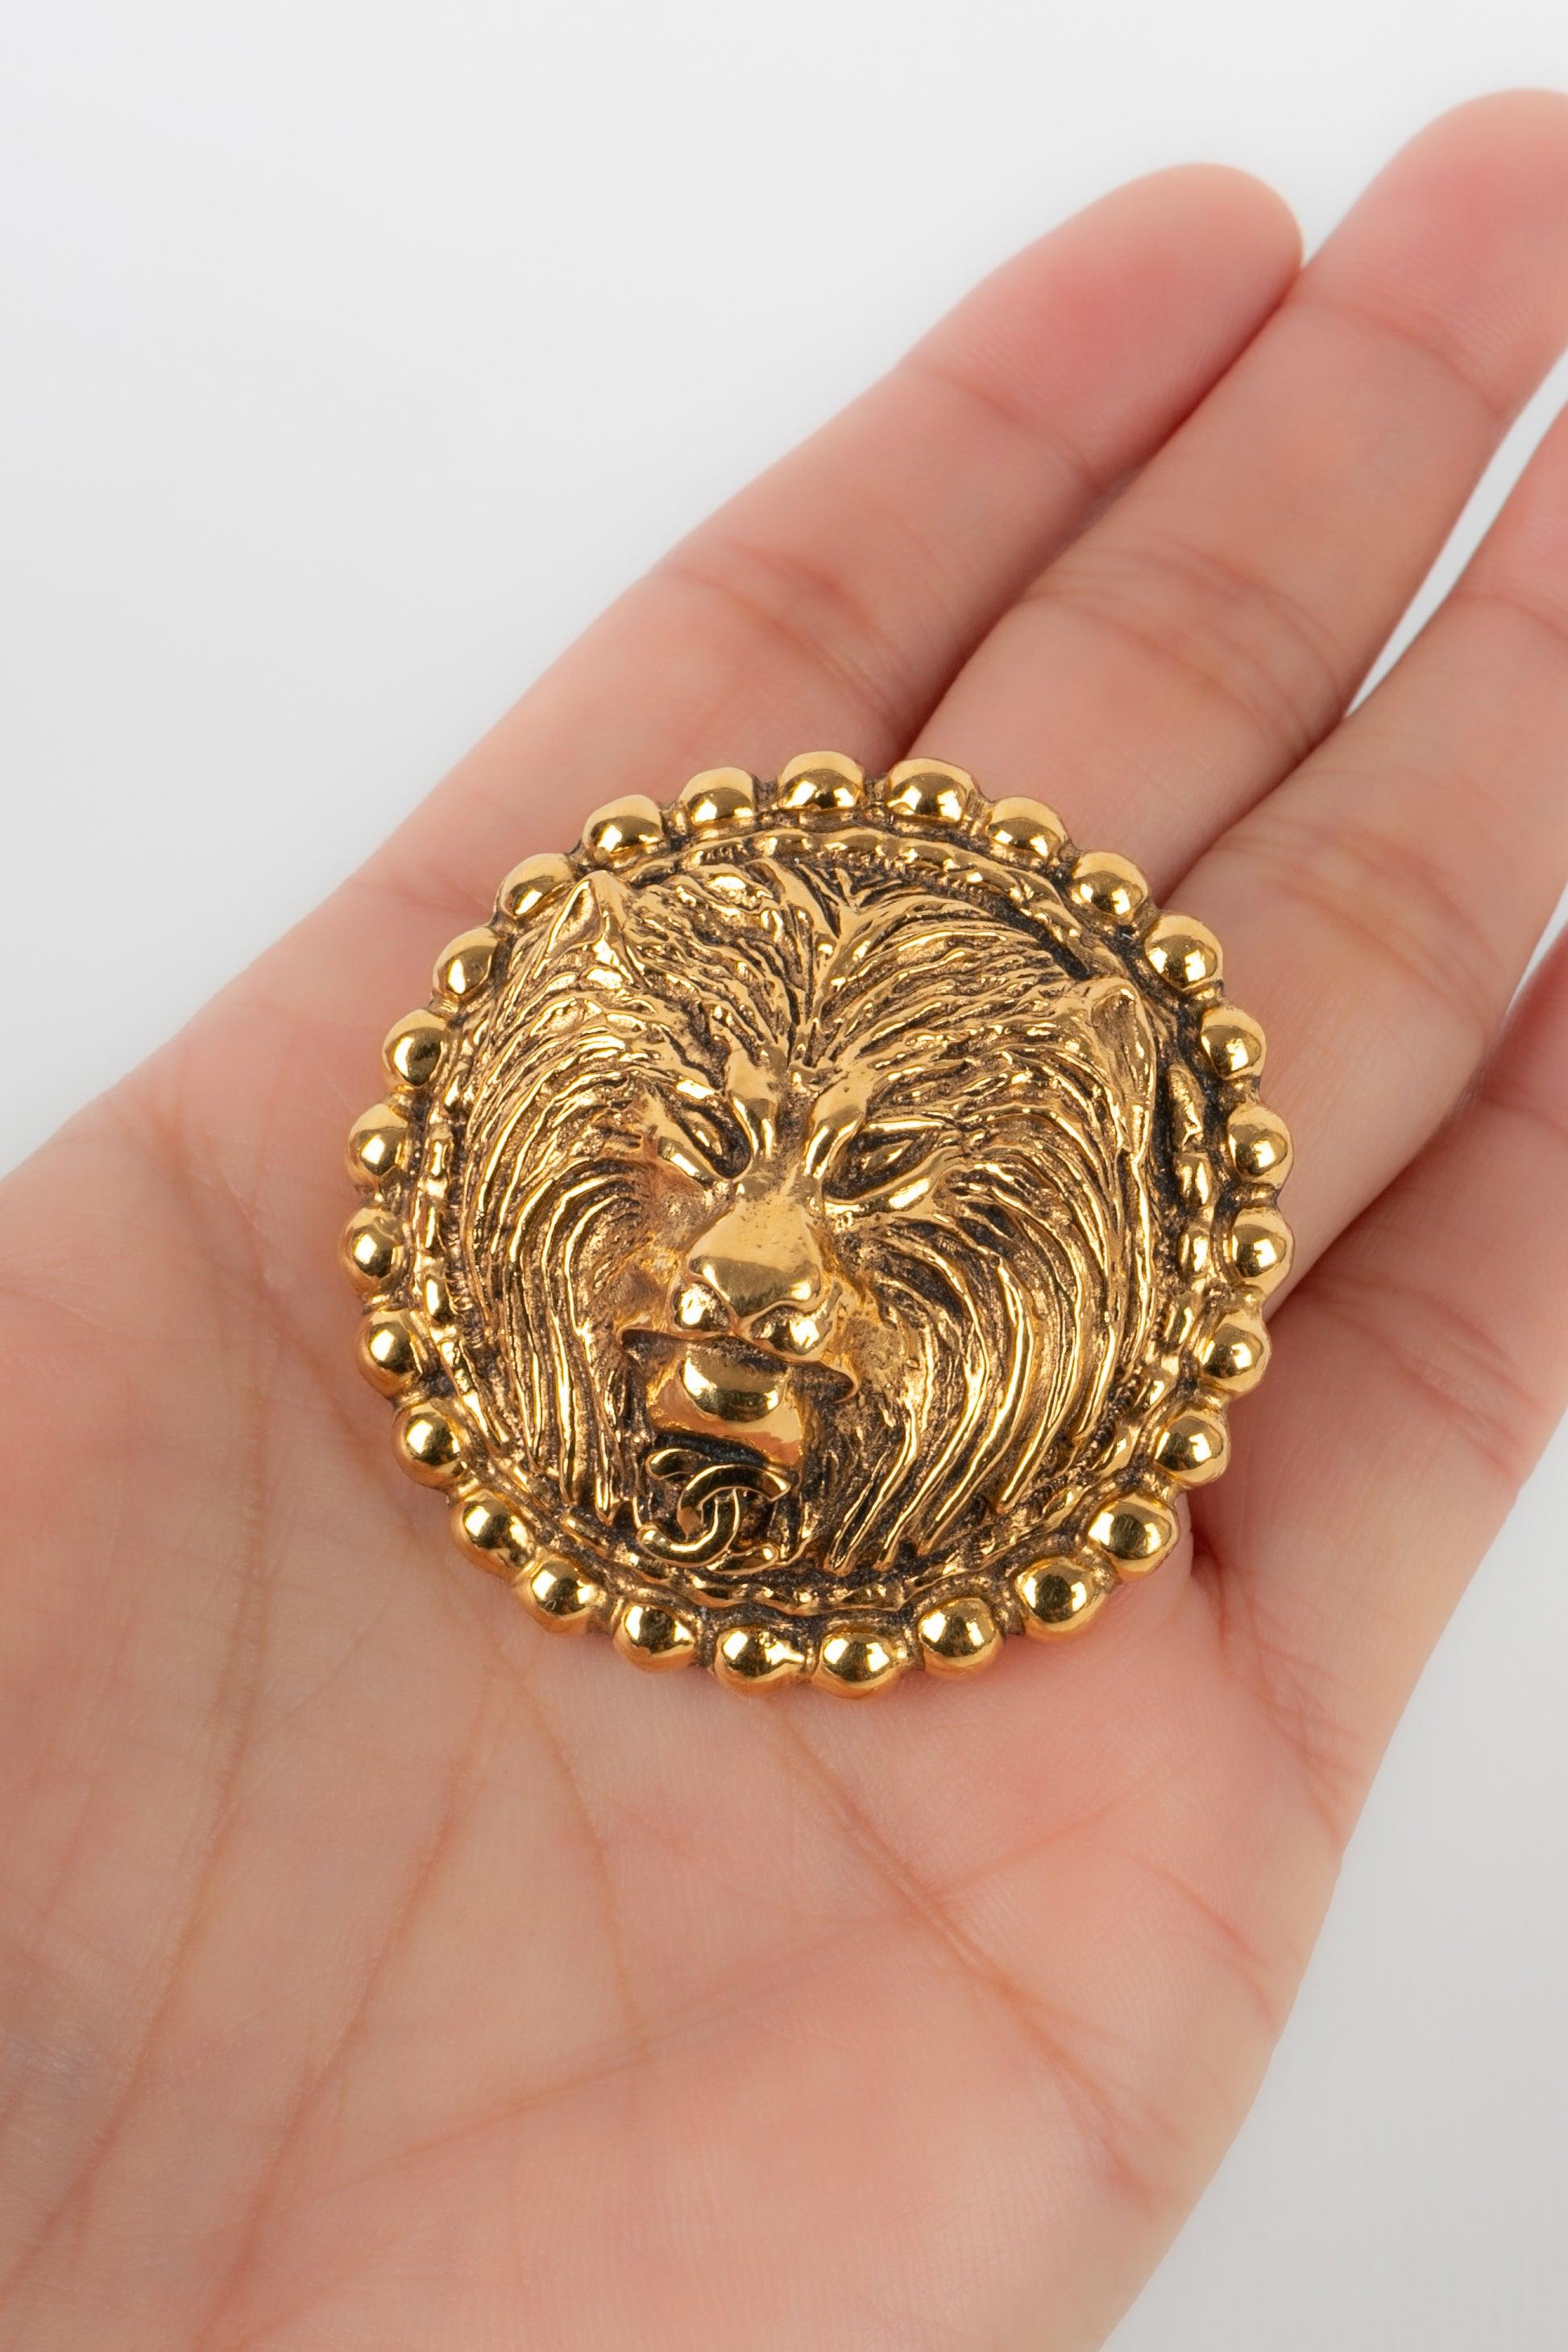 Chanel - Golden metal brooch representing a lion head. 1983 Collection.

Additional information:
Condition: Very good condition
Dimensions: Diameter: 4.5 cm

Seller reference: BRB77